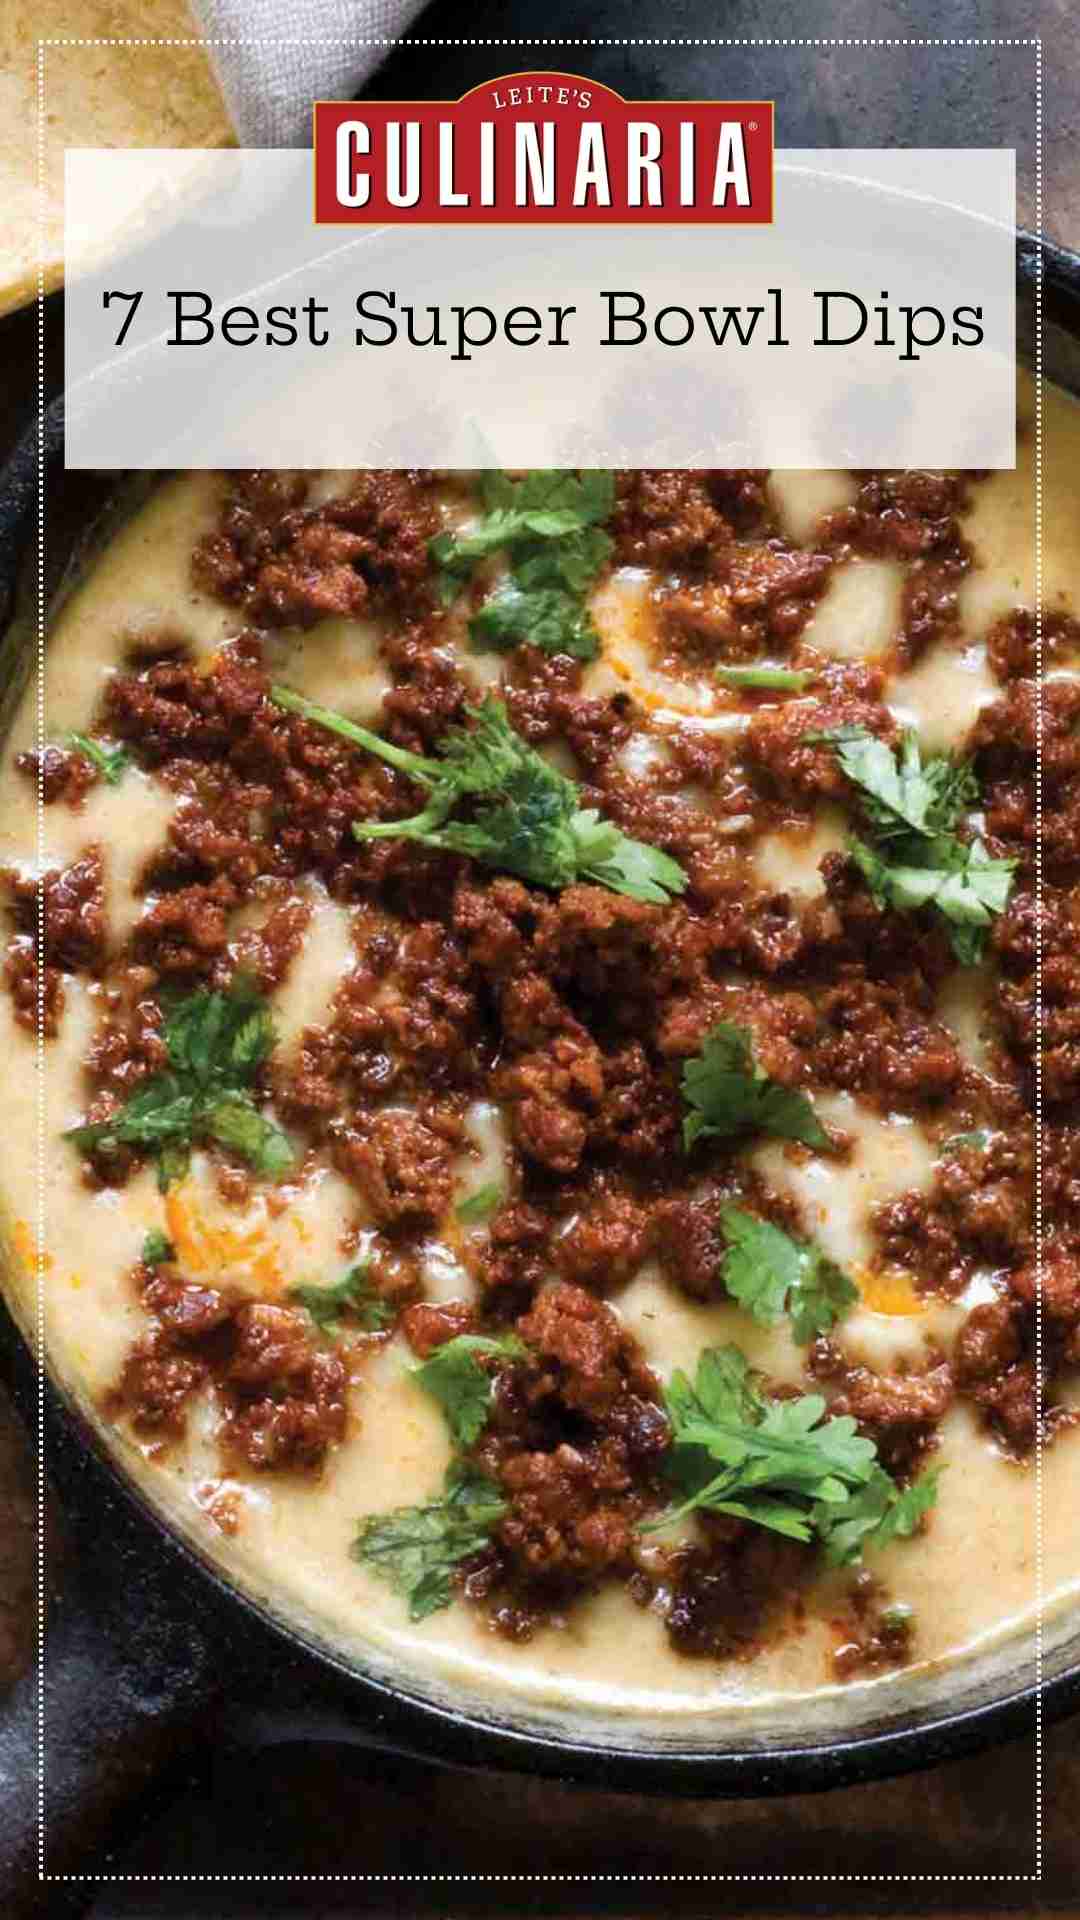 A dish of cheese dip with crumbled chorizo on top.